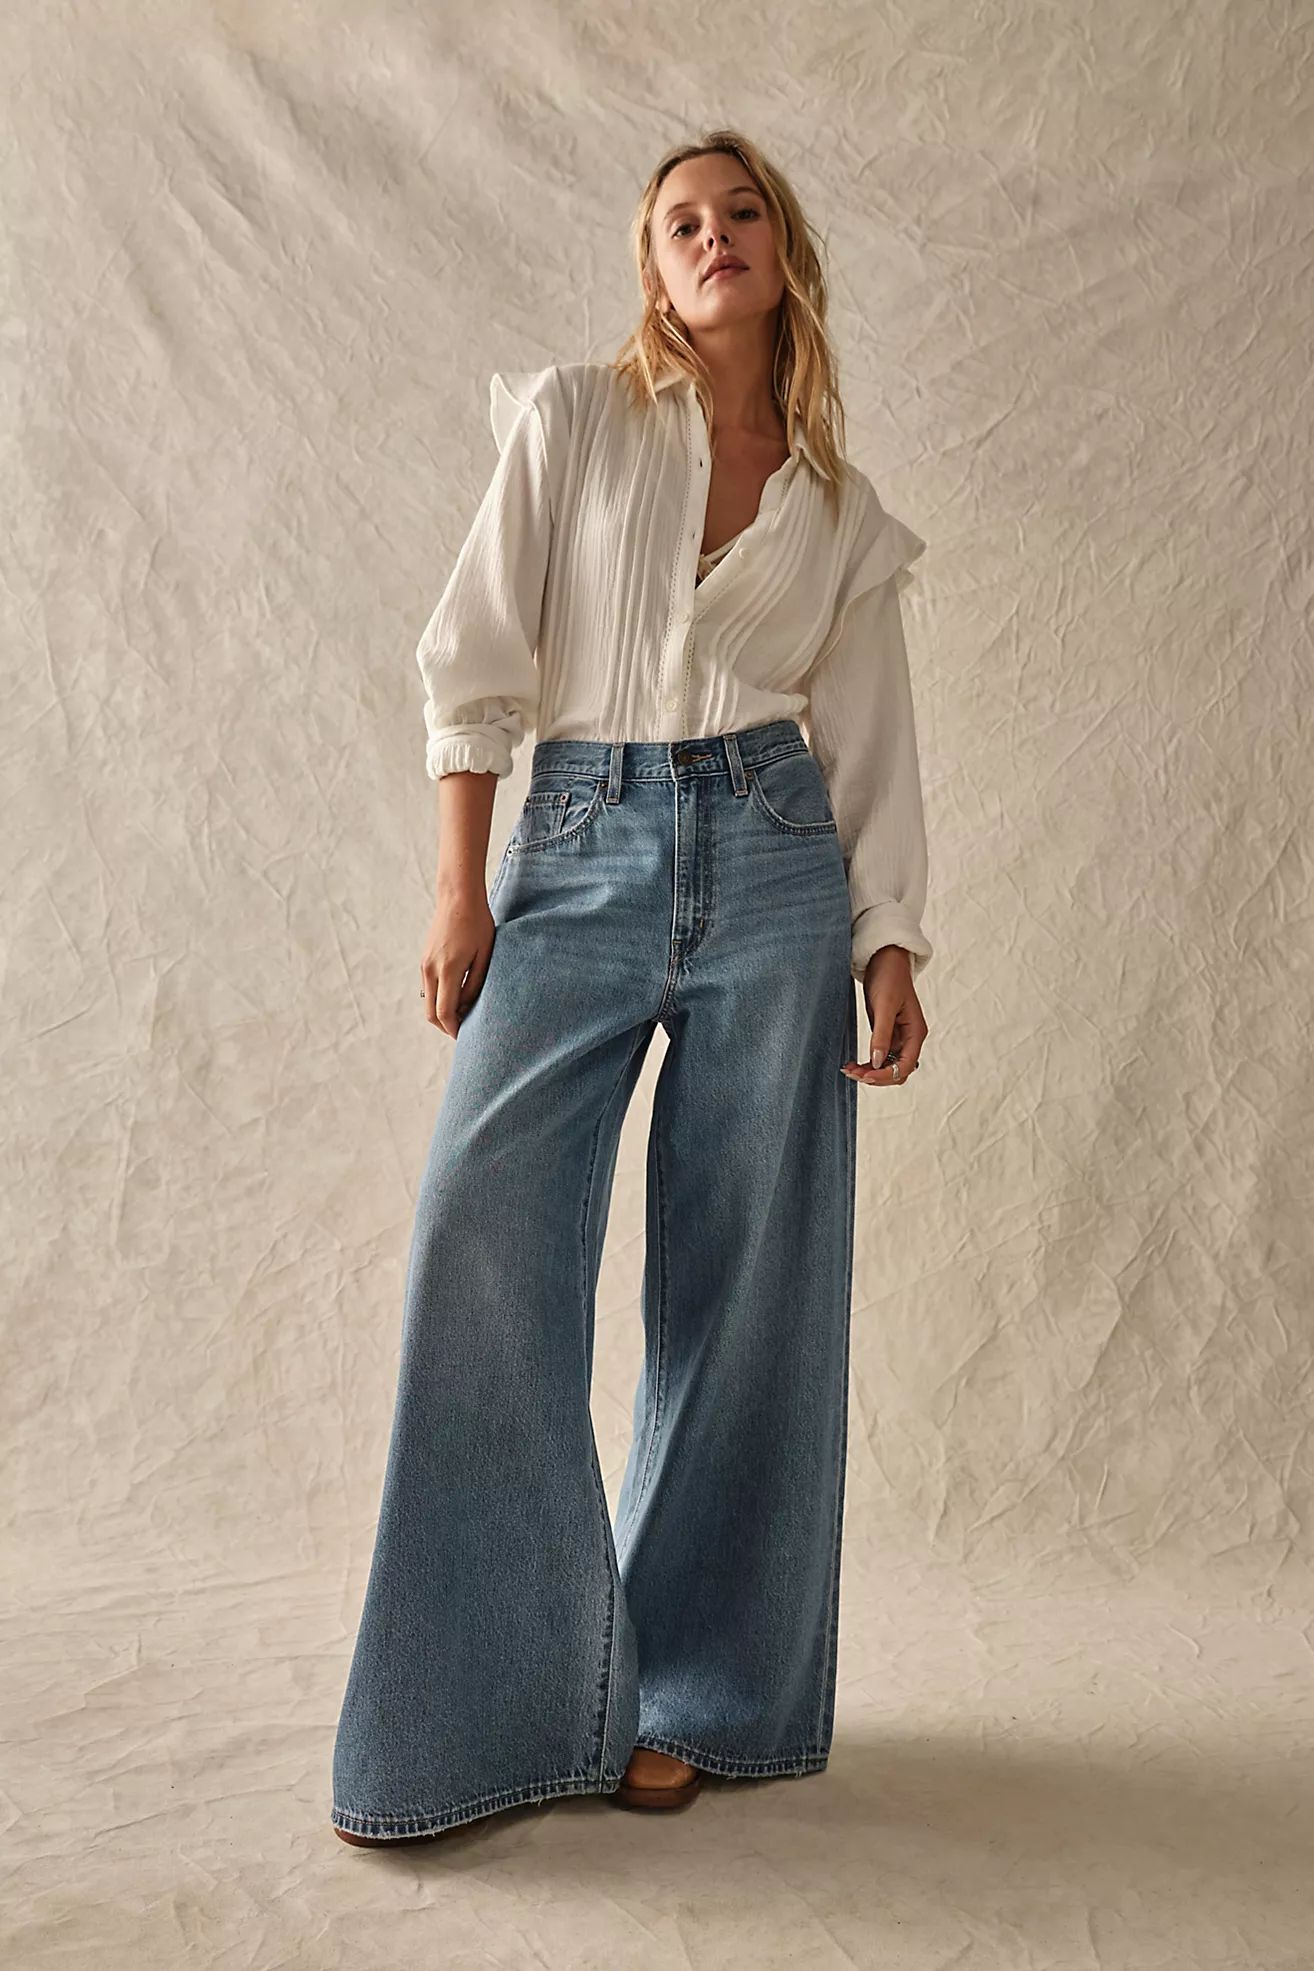 Levi's XL Flood Jeans | Free People (Global - UK&FR Excluded)